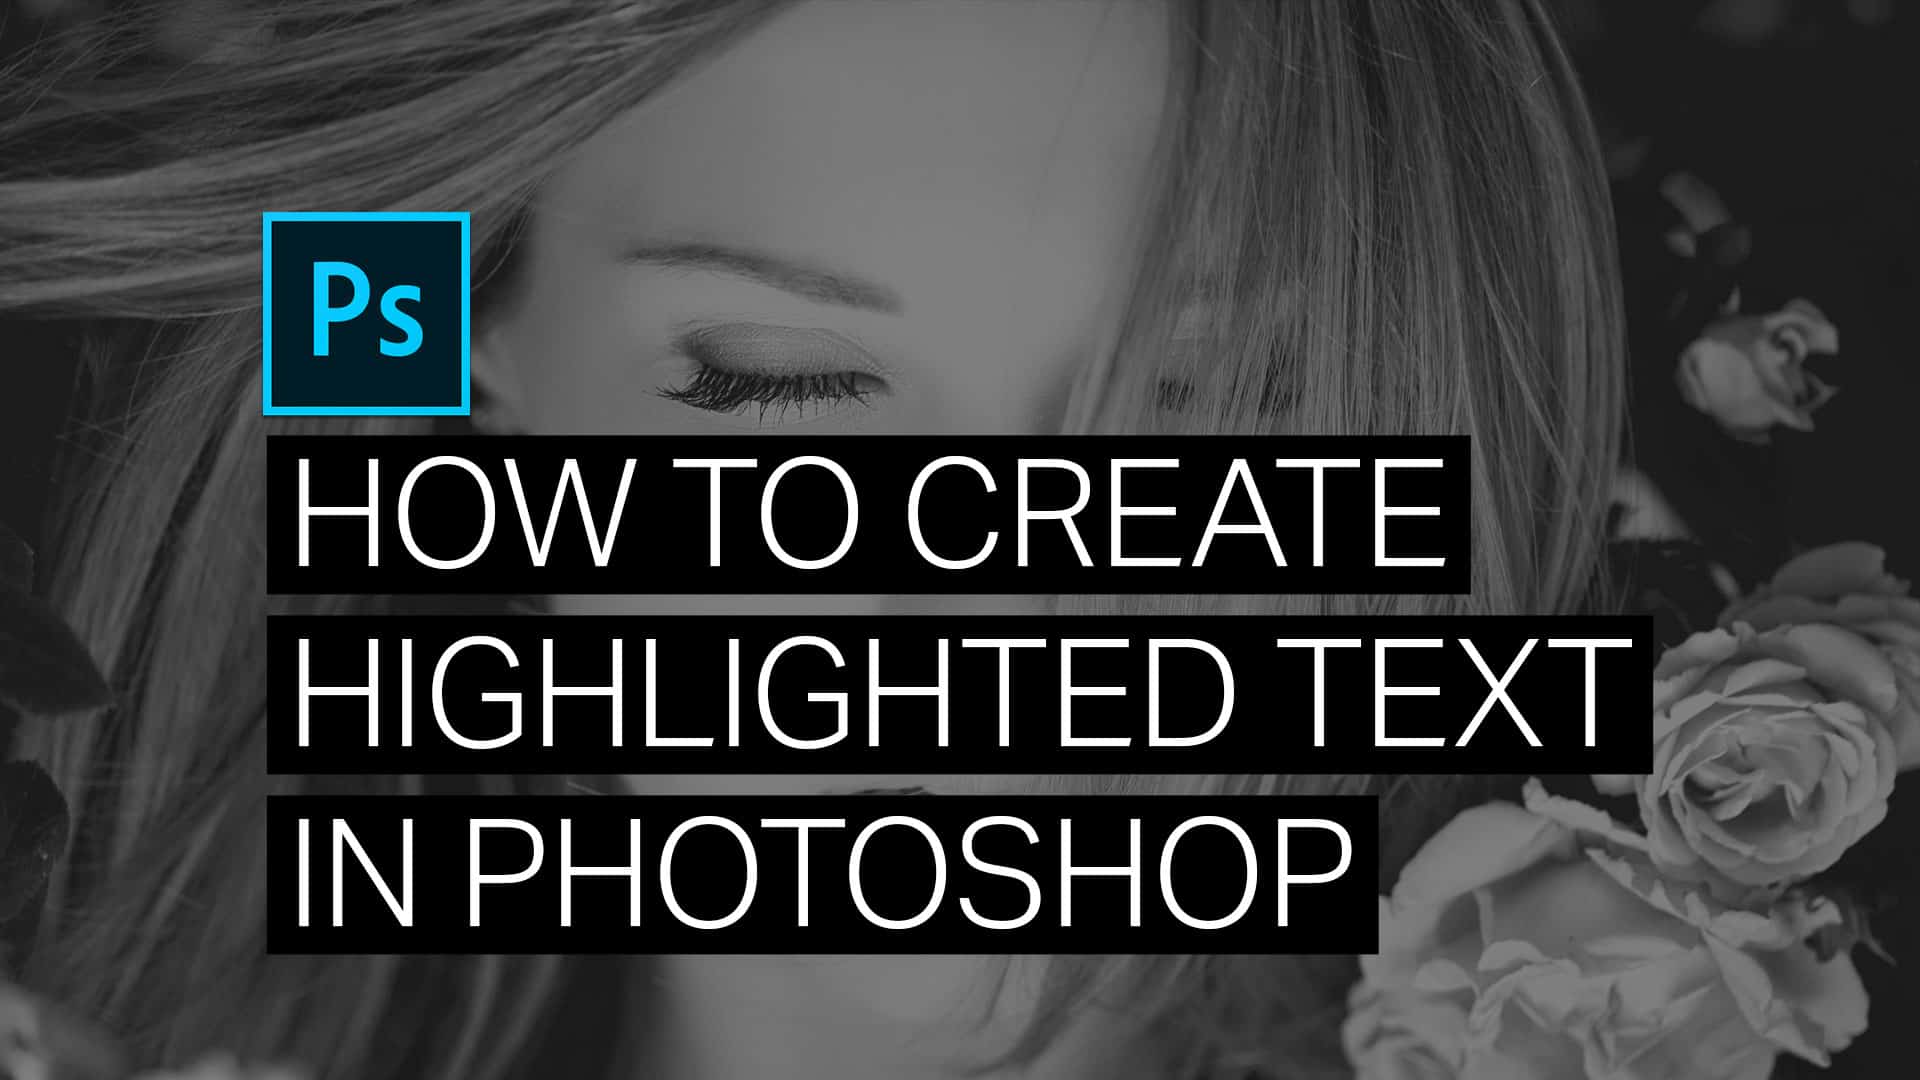 Highlighted Text Photoshop Tutorial